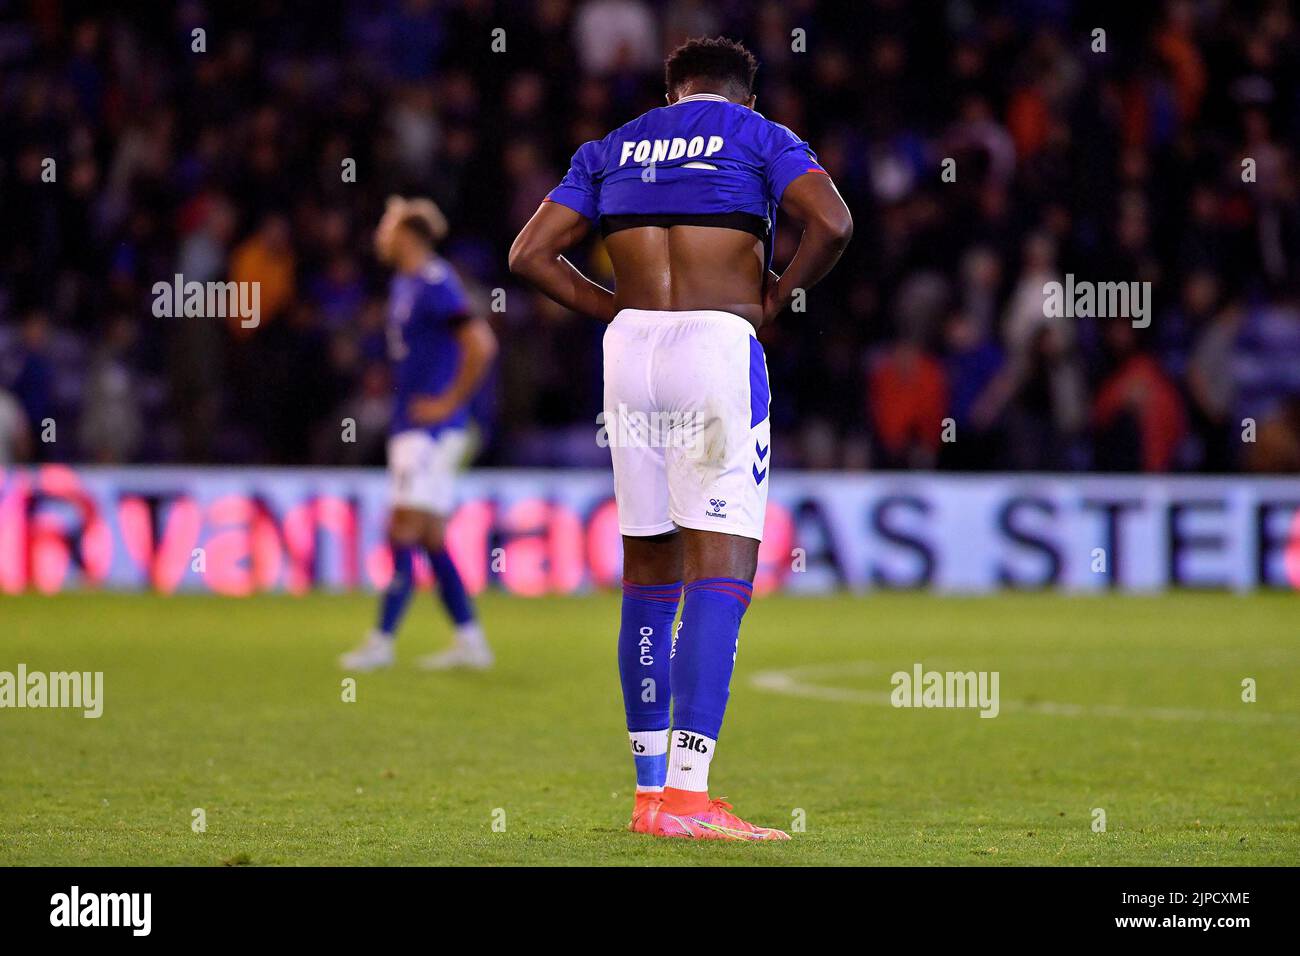 Stock action picture of Mike Fondop-Talom of Oldham Athletic during the Vanarama National League match between Oldham Athletic and Wealdstone at Boundary Park, Oldham on Wednesday 17th August 2022. (Credit: Eddie Garvey | MI News) Credit: MI News & Sport /Alamy Live News Stock Photo